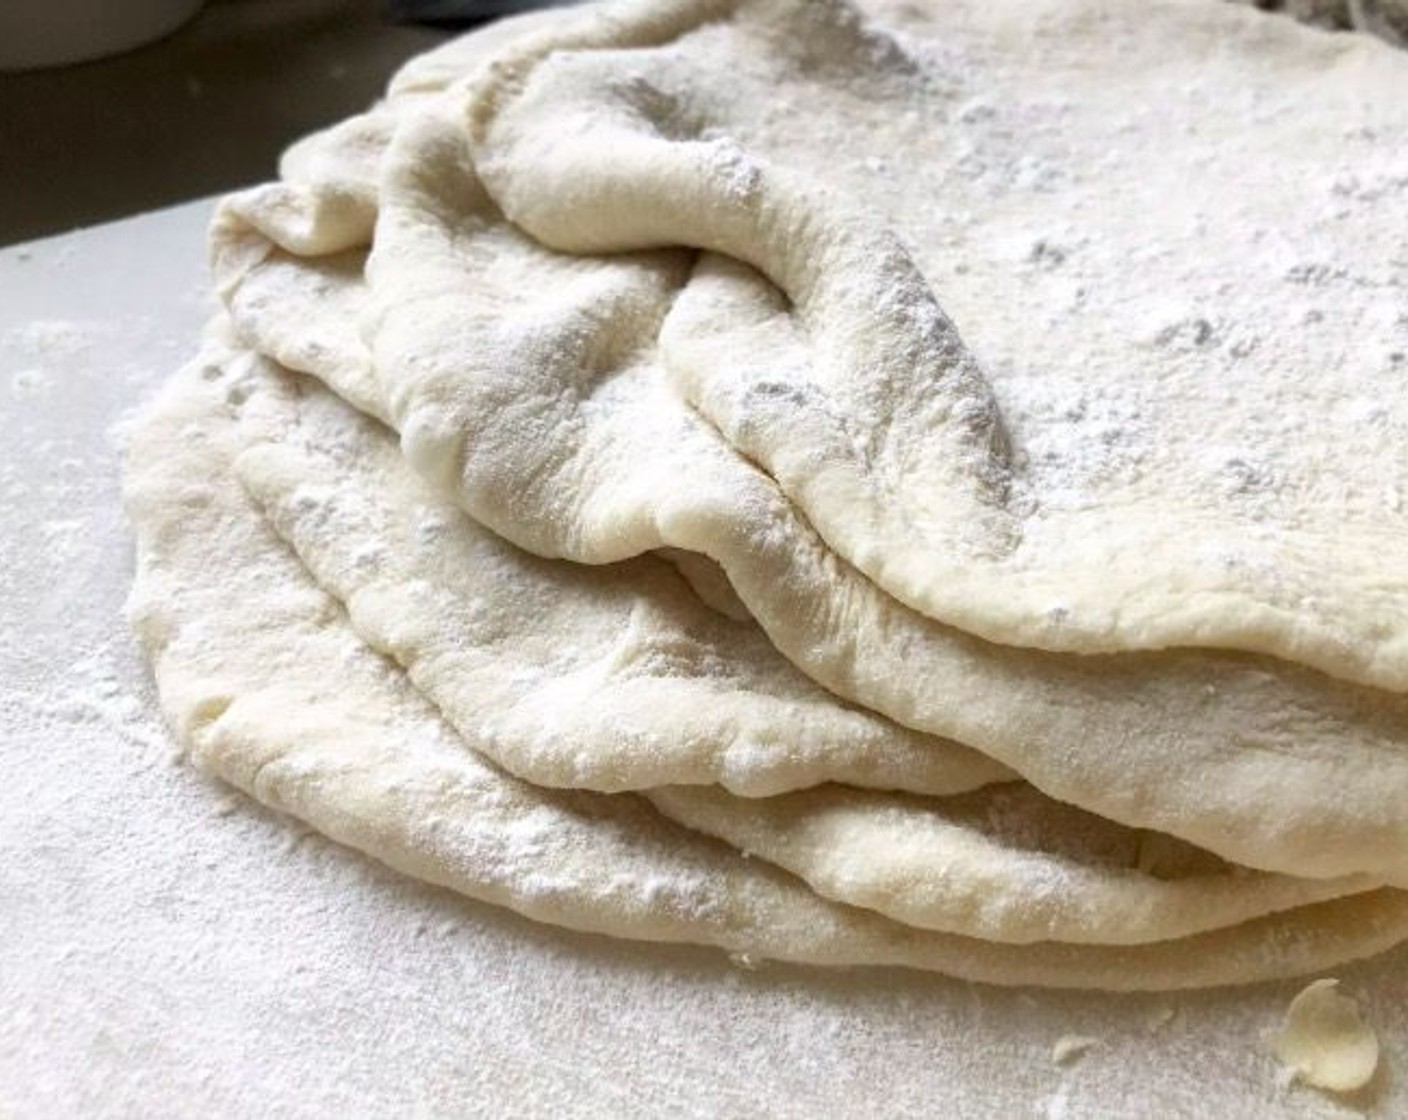 step 7 When ready to cook, divide the dough into 8 equal balls. On a lightly floured surface, roll each one into a large oval about 8 inches in length and about 1/4-inch thick. As you form the ovals and stack them in a pile, be sure to sprinkle them with flour to prevent sticking.